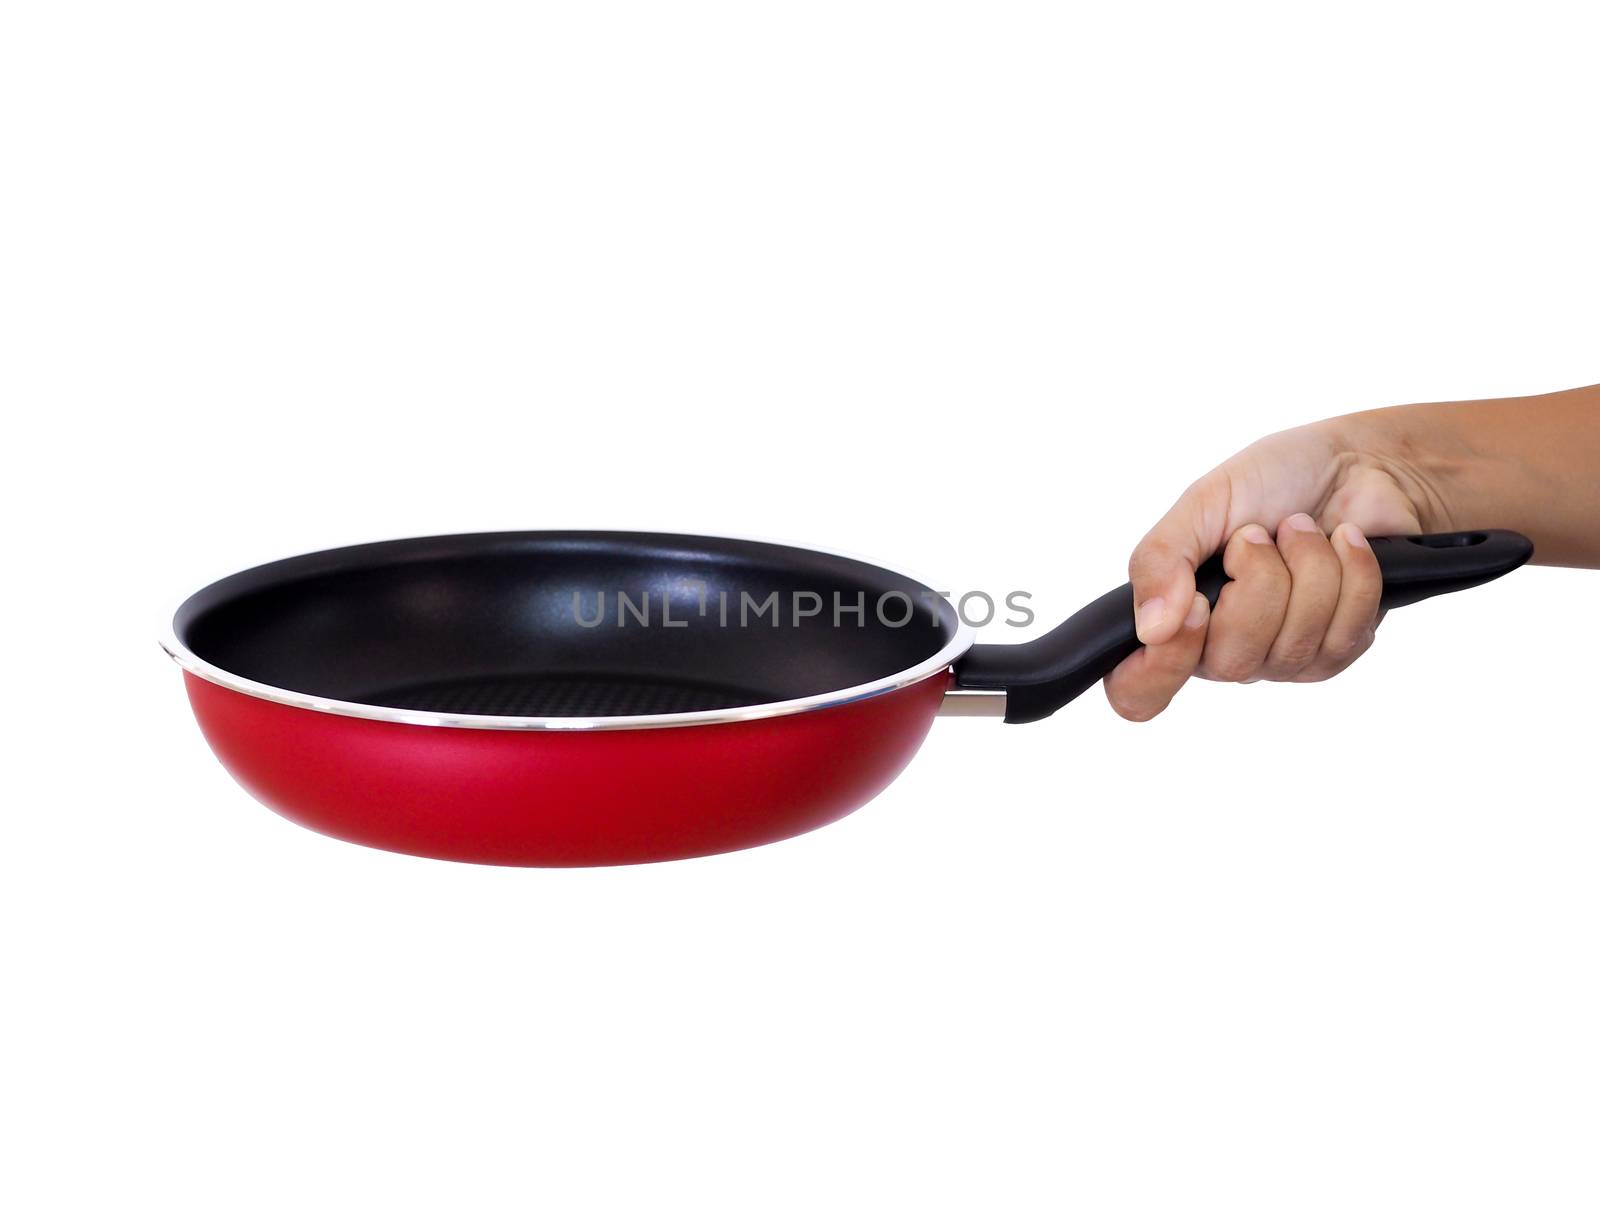 Hand holding red frying pan isolated on white background